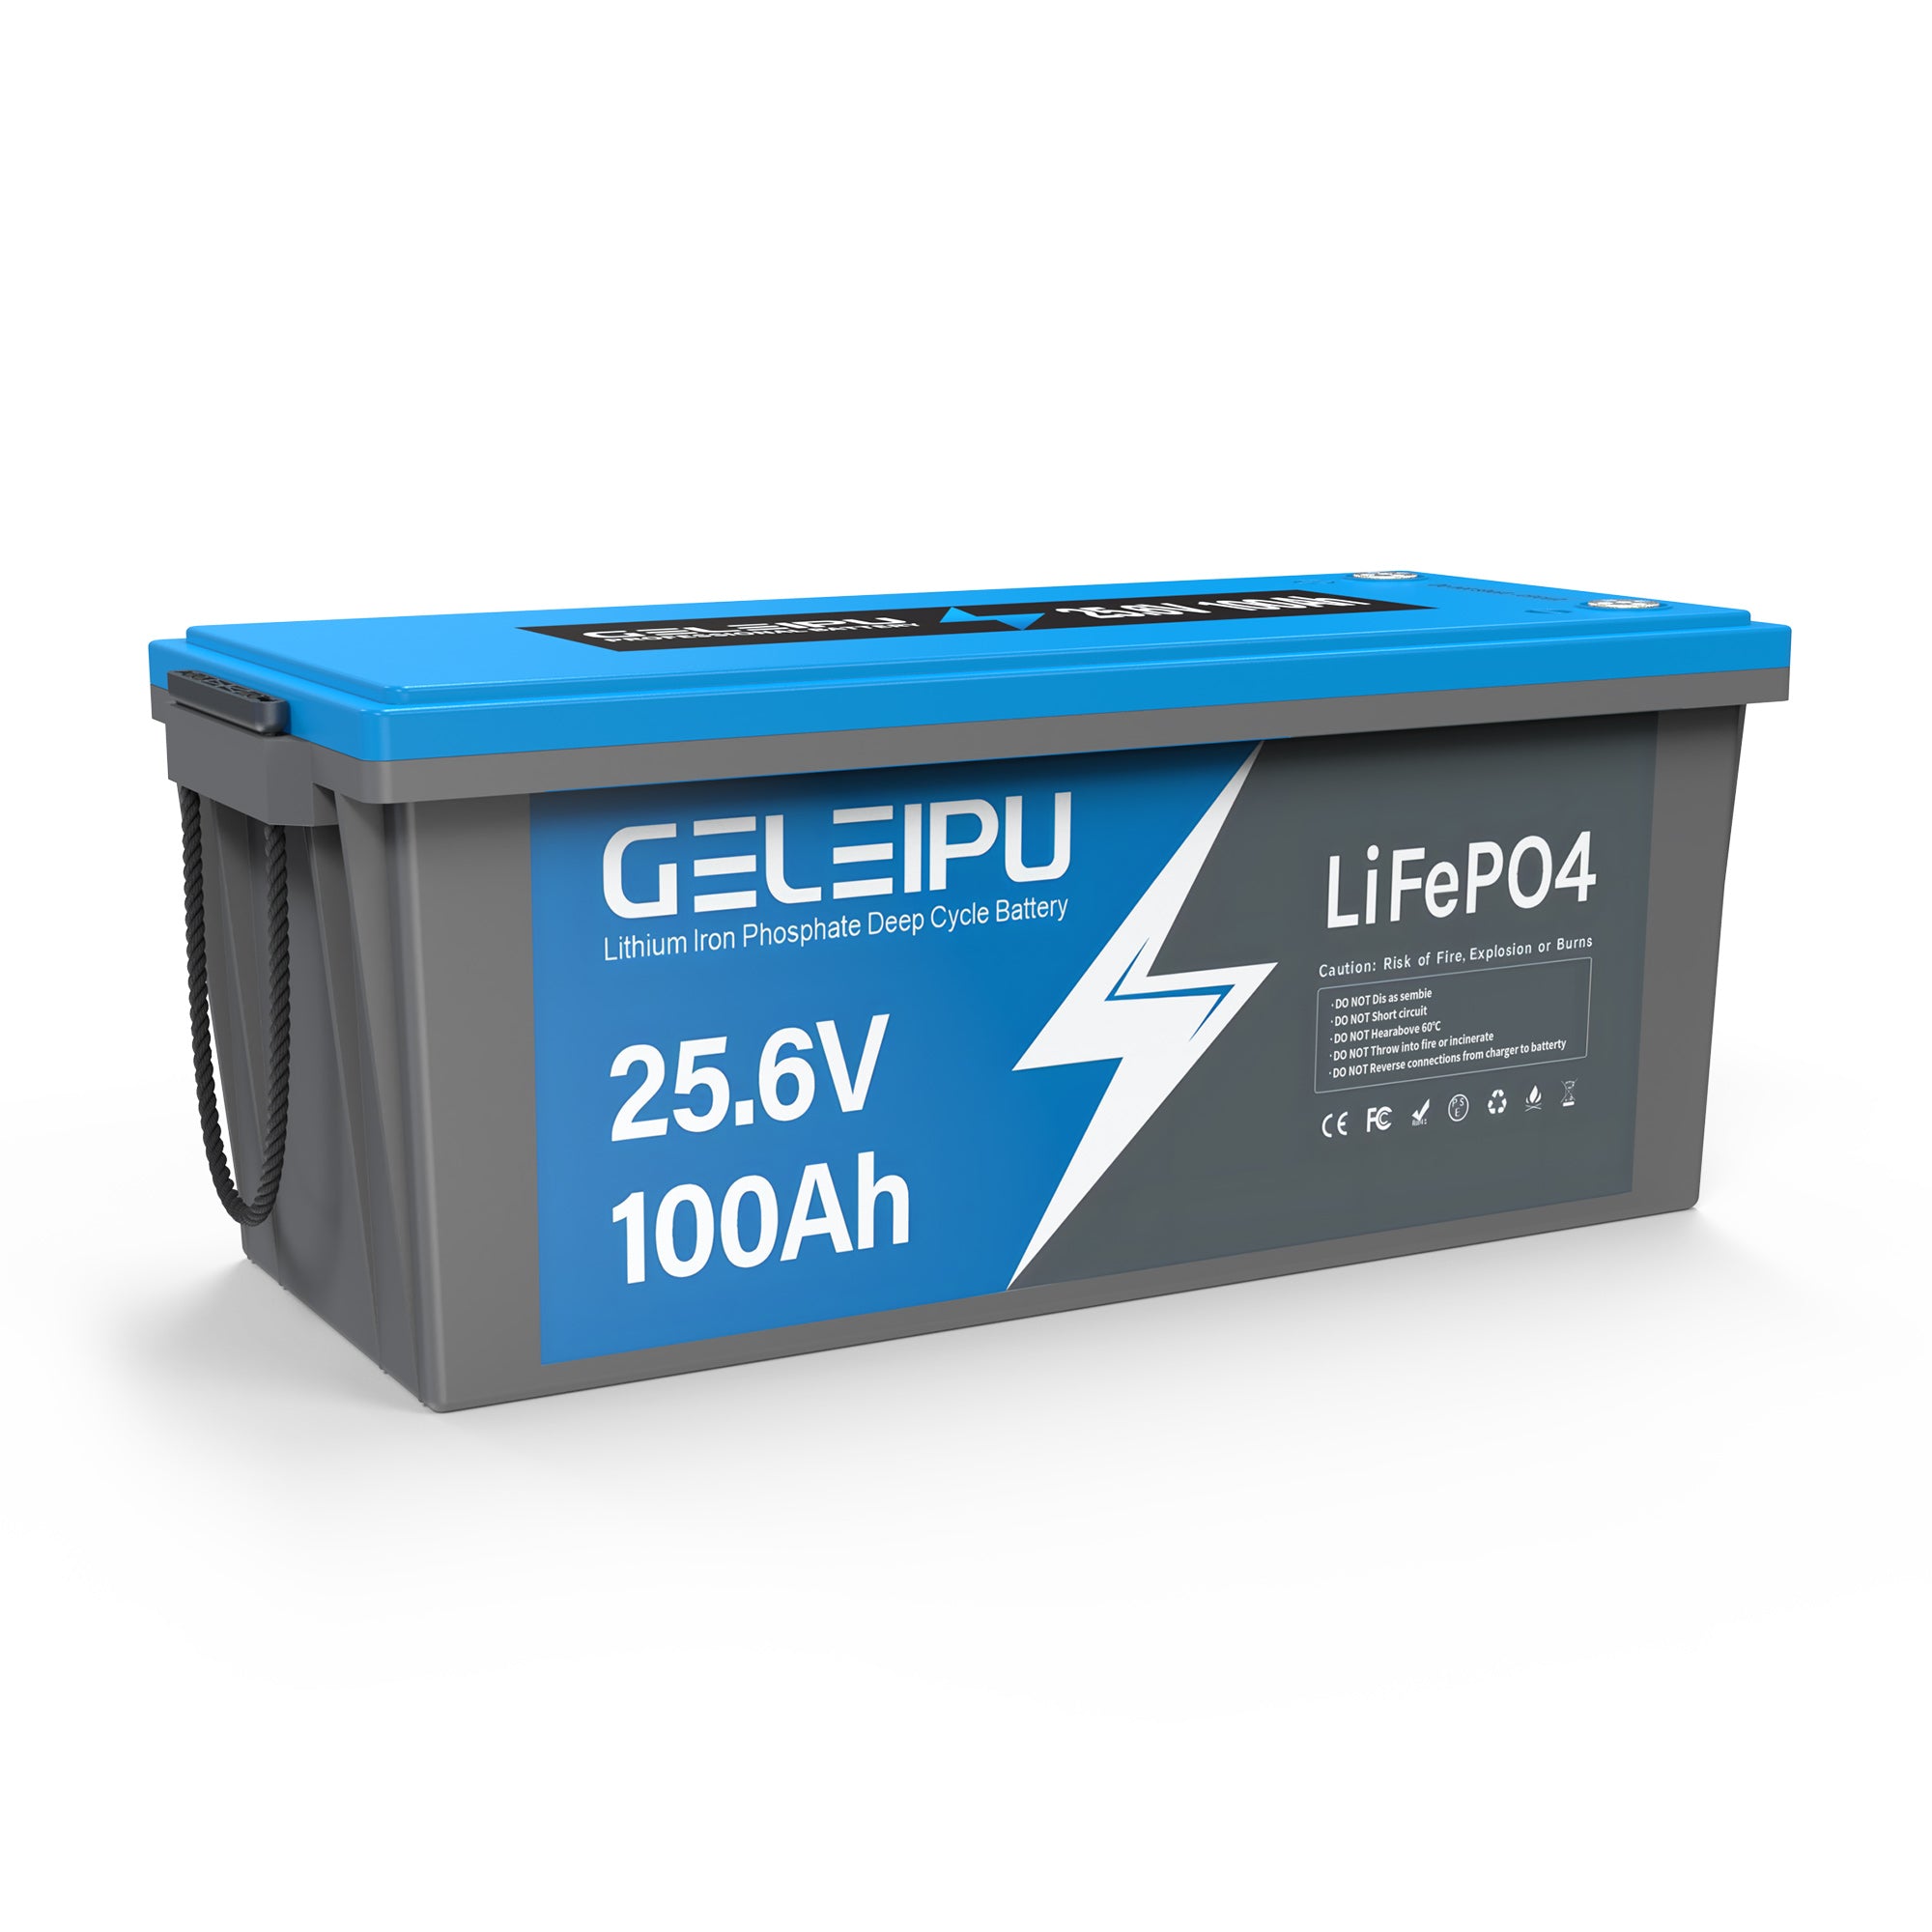 Geleipu-The most cost-effective LiFePO4 batteries